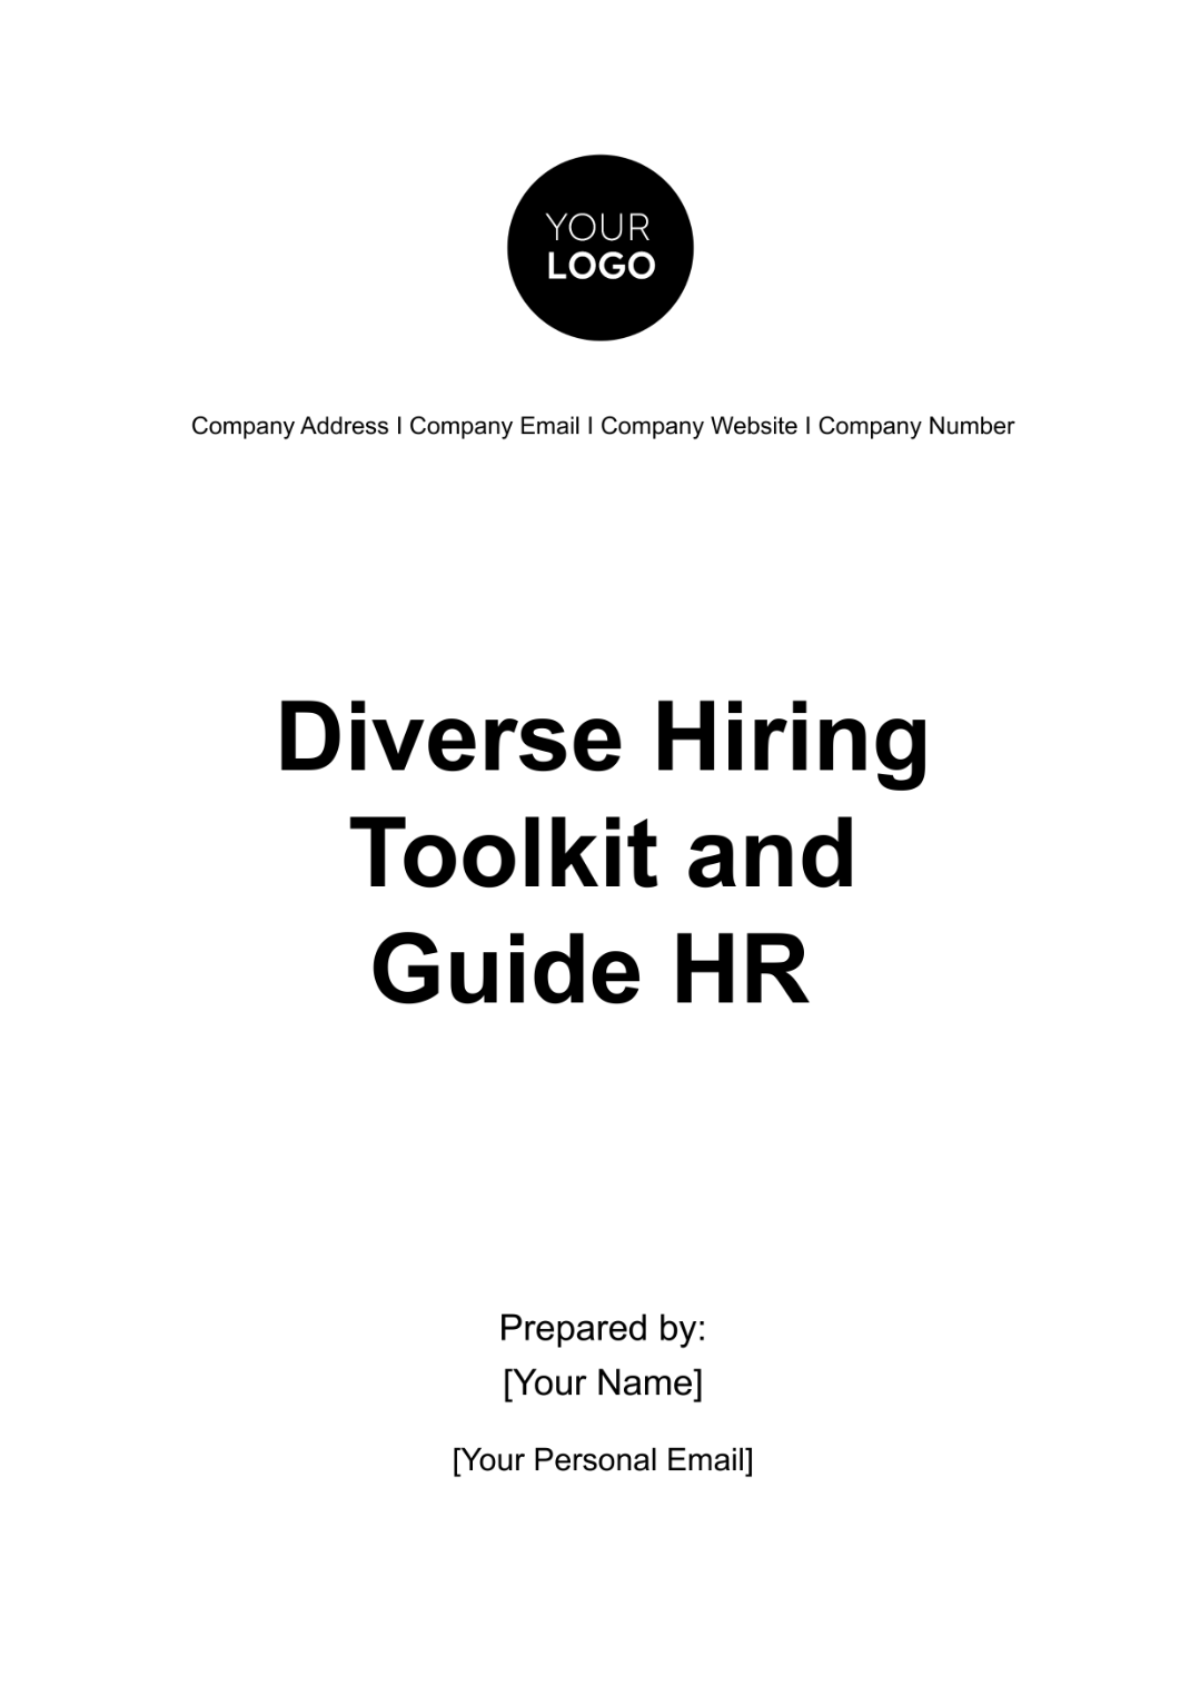 Free Diverse Hiring Toolkit and Guide HR Template